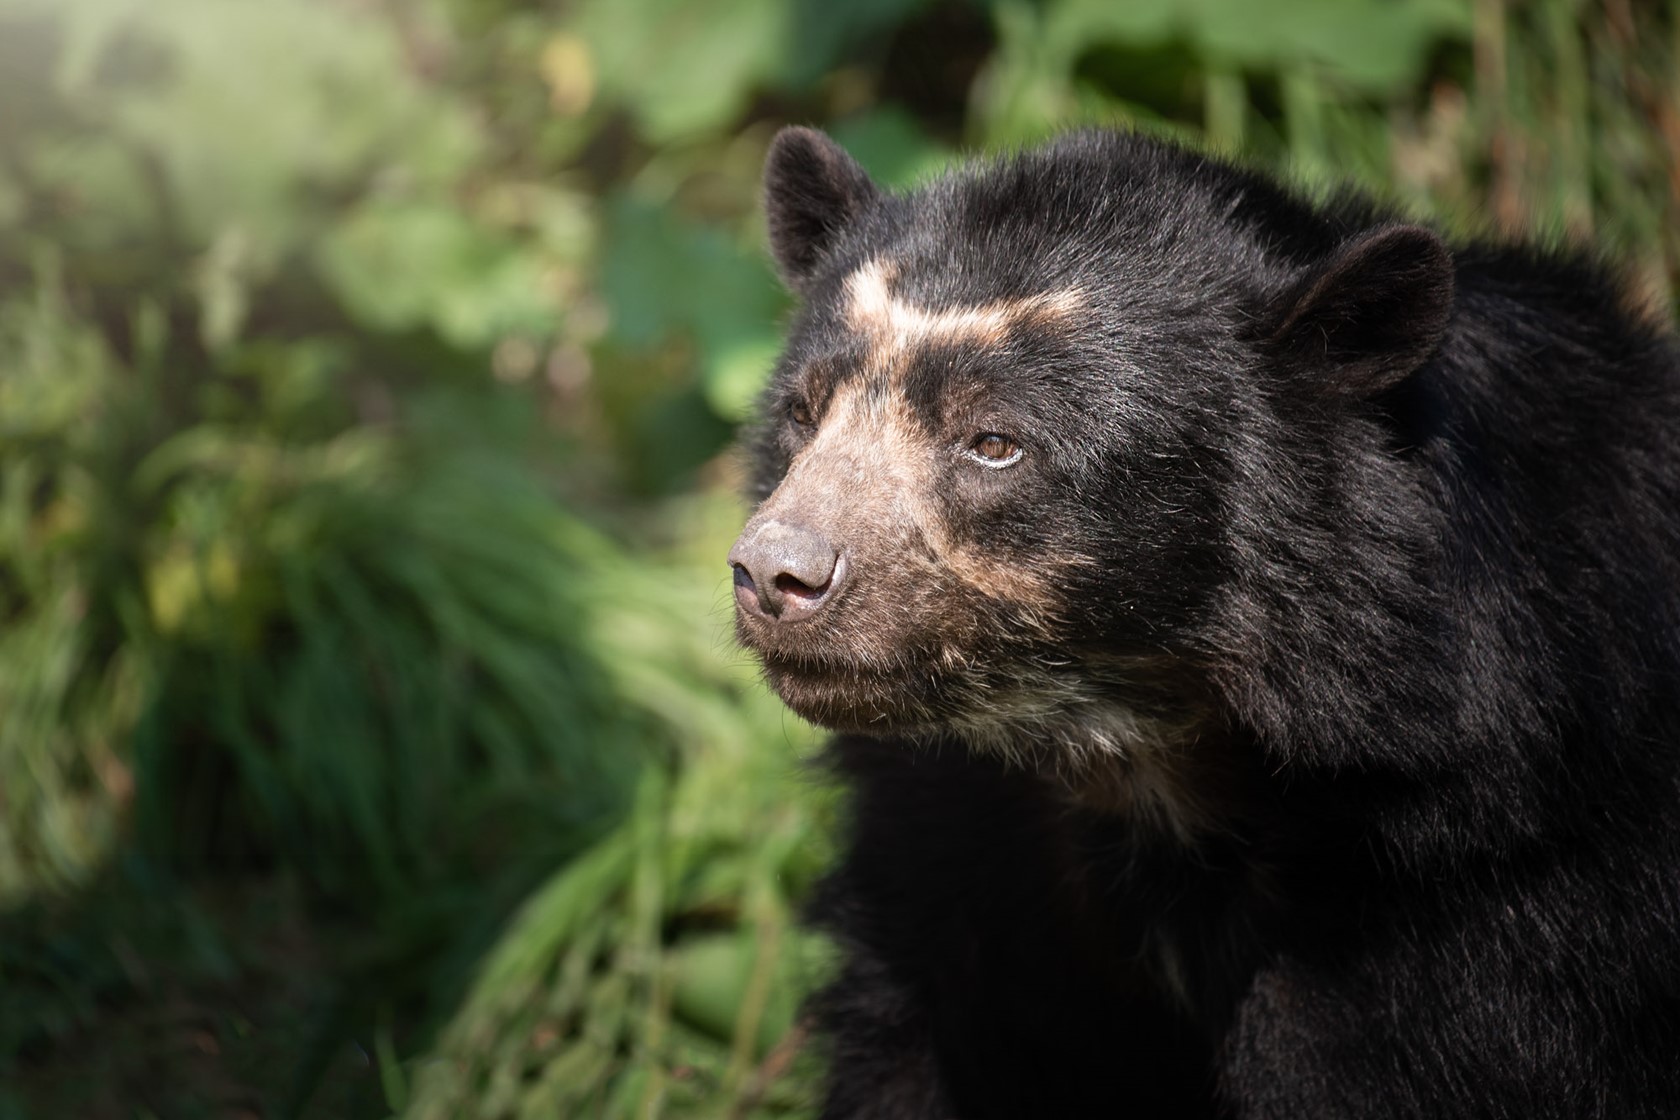 Spectacled bear at Jersey Zoo